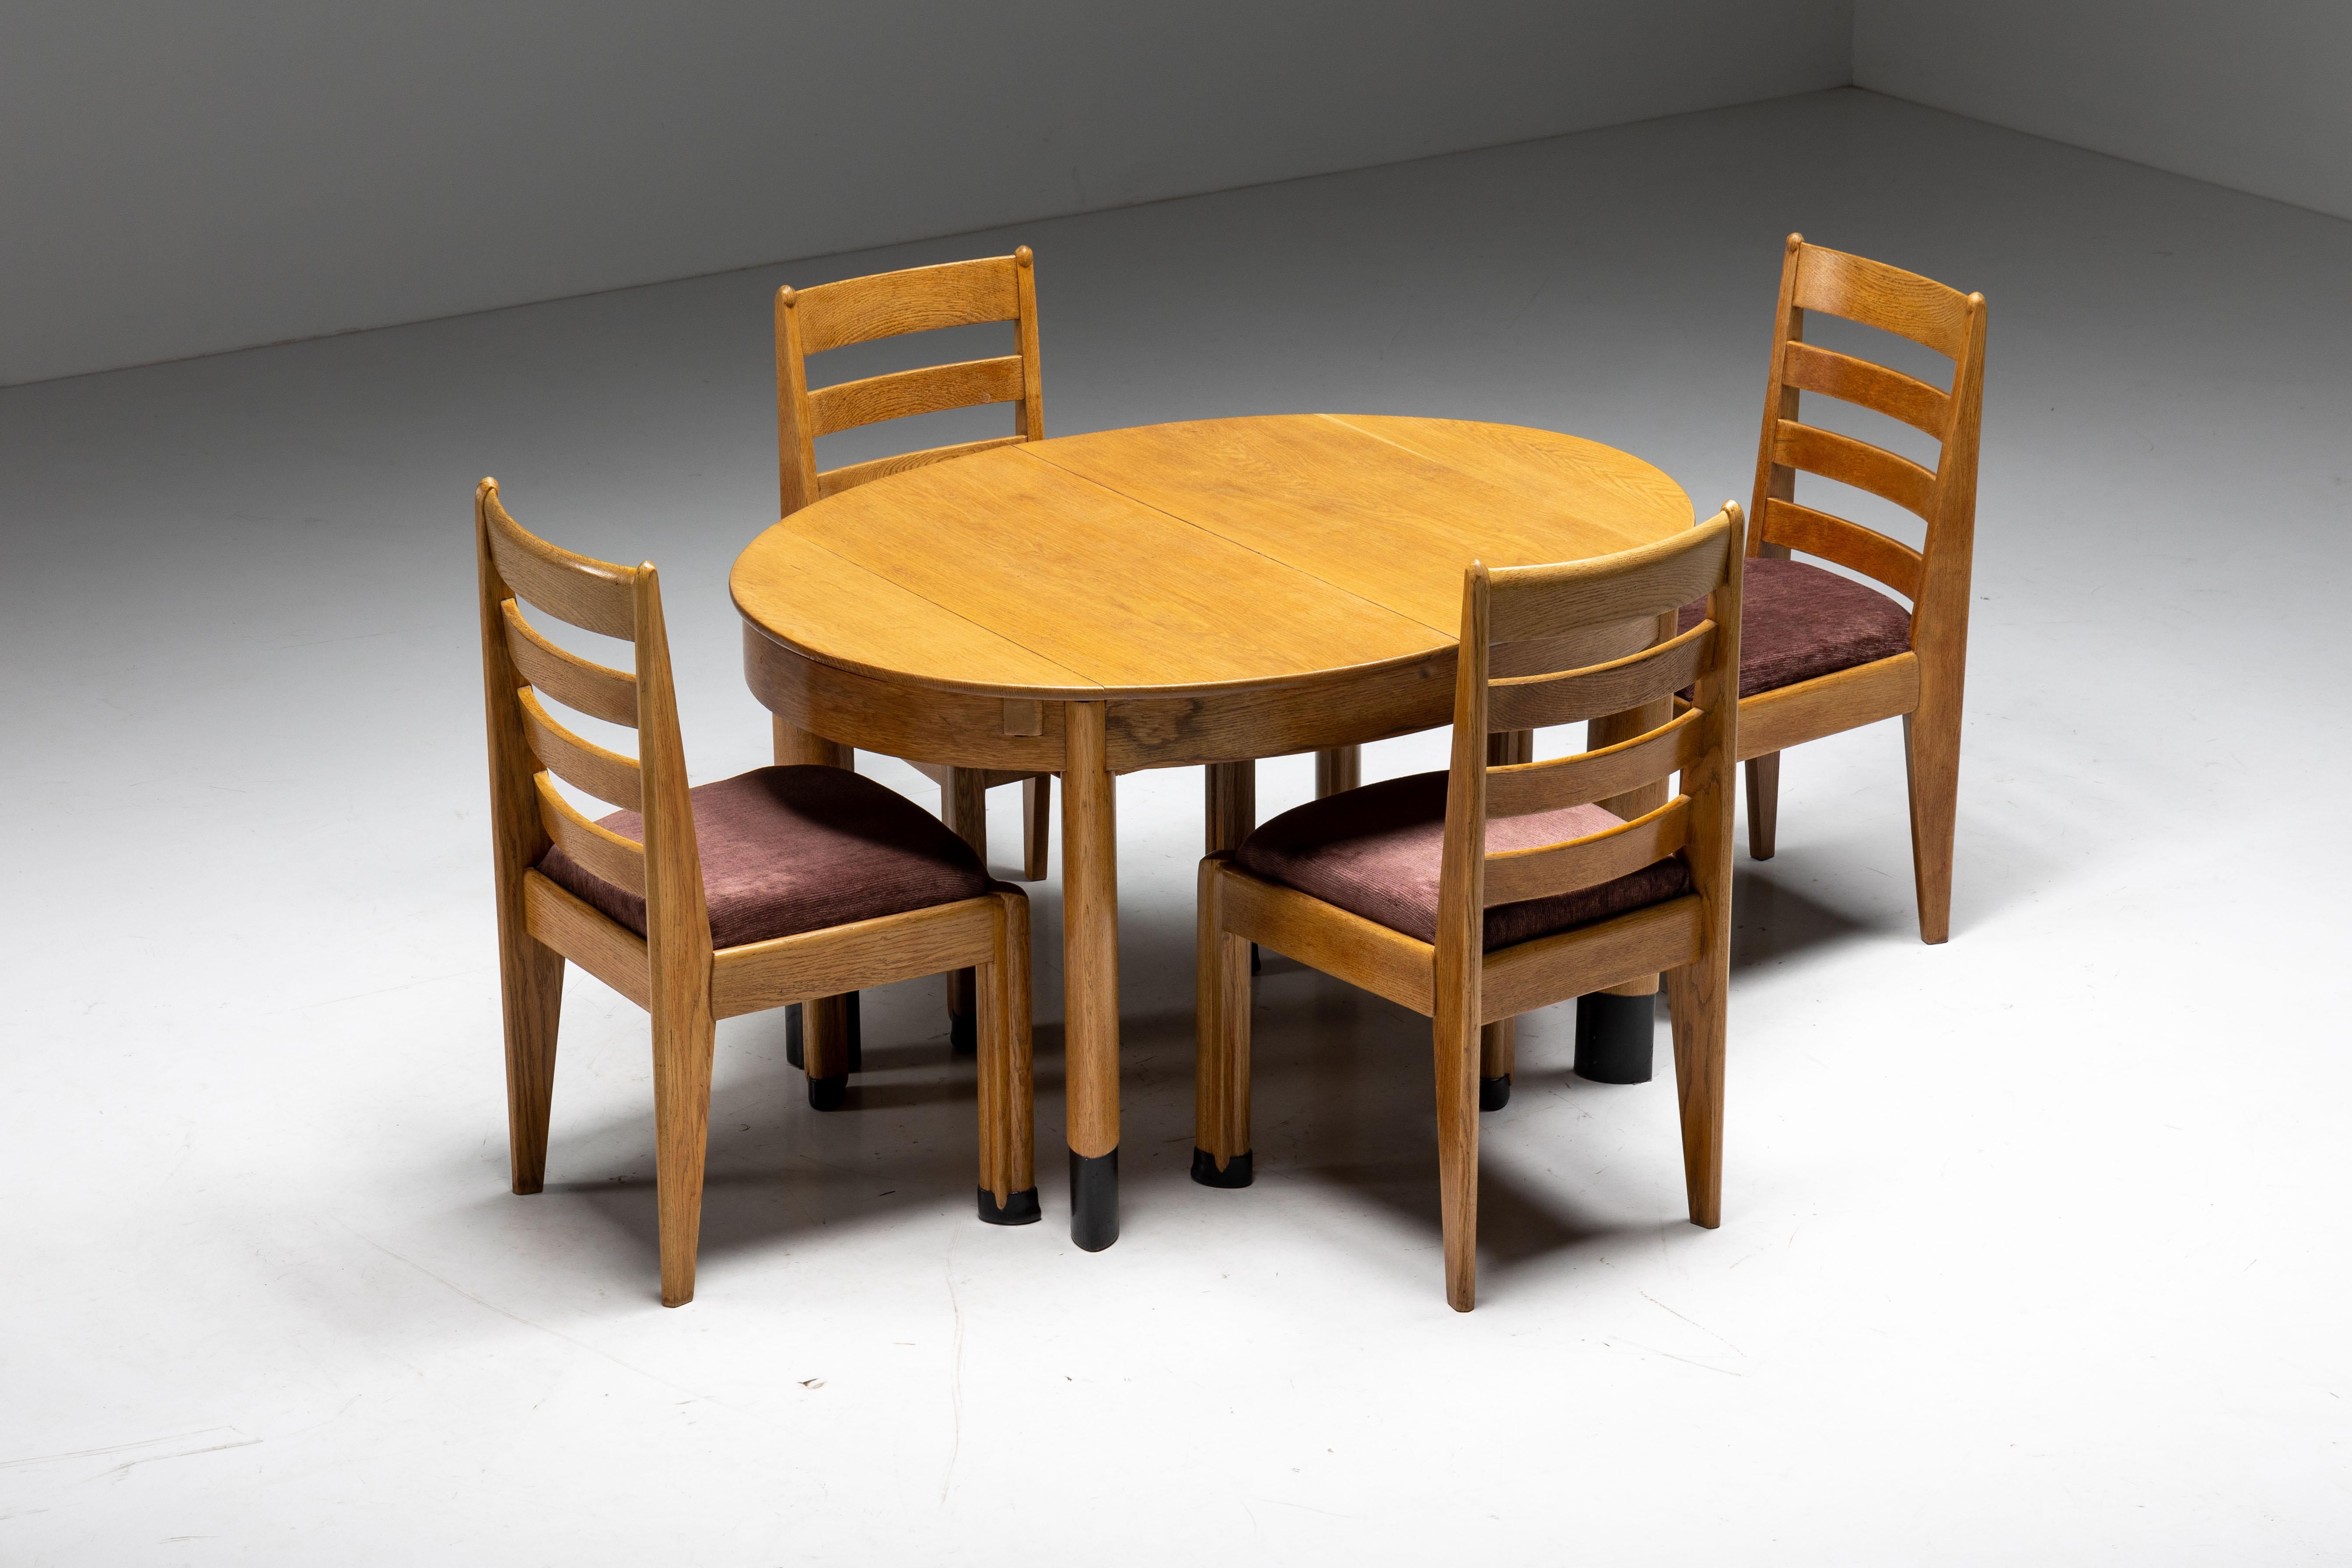 Dutch Rationalist Oval Dining Set in Oak, Holland, 1920s For Sale